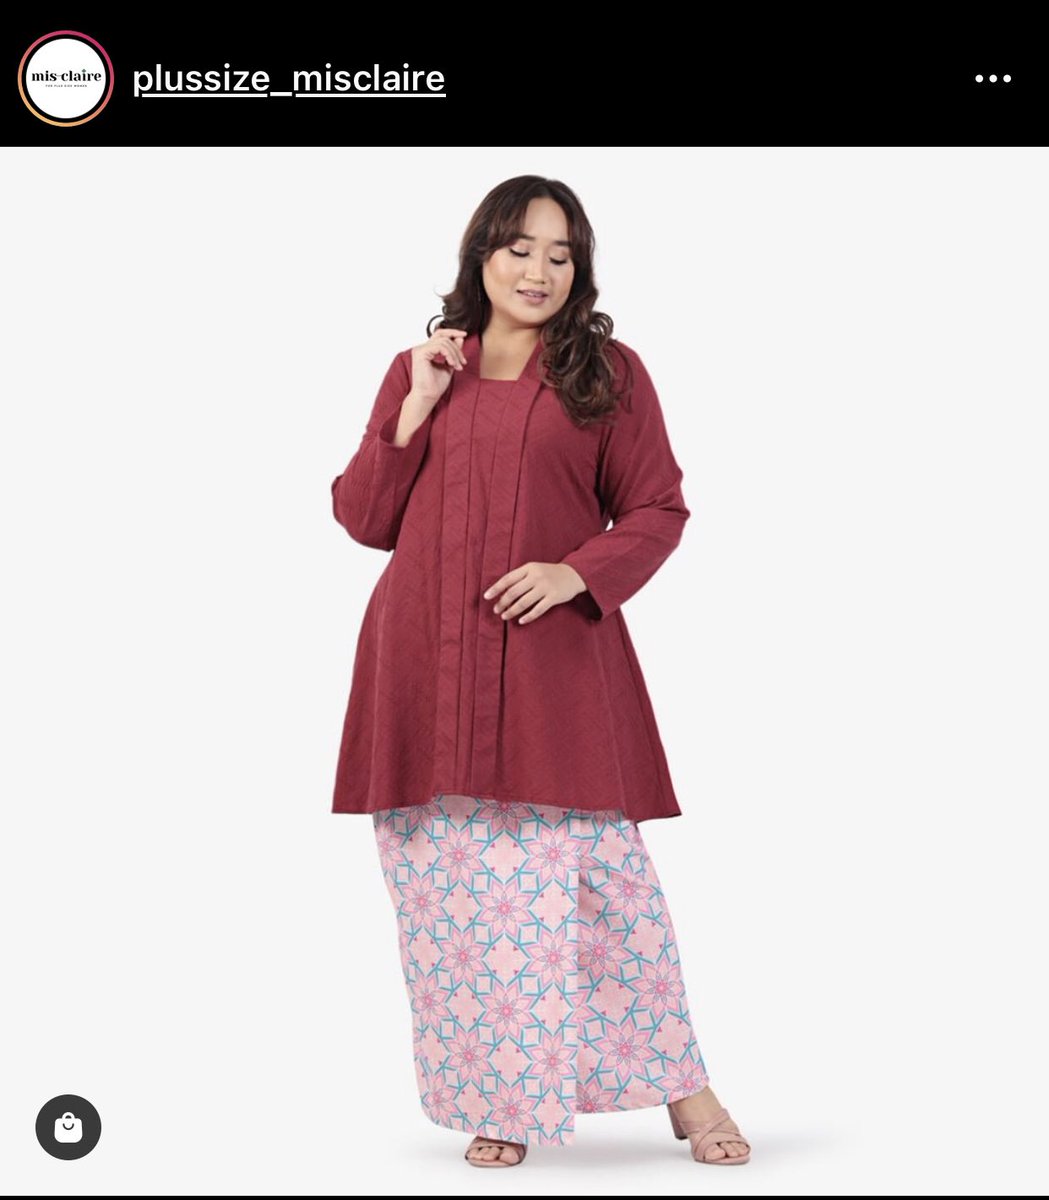 I notice it’s kinda hard to find plus sizes you ever go shopping and the biggest size is L/XL je? Or even worse freesize 